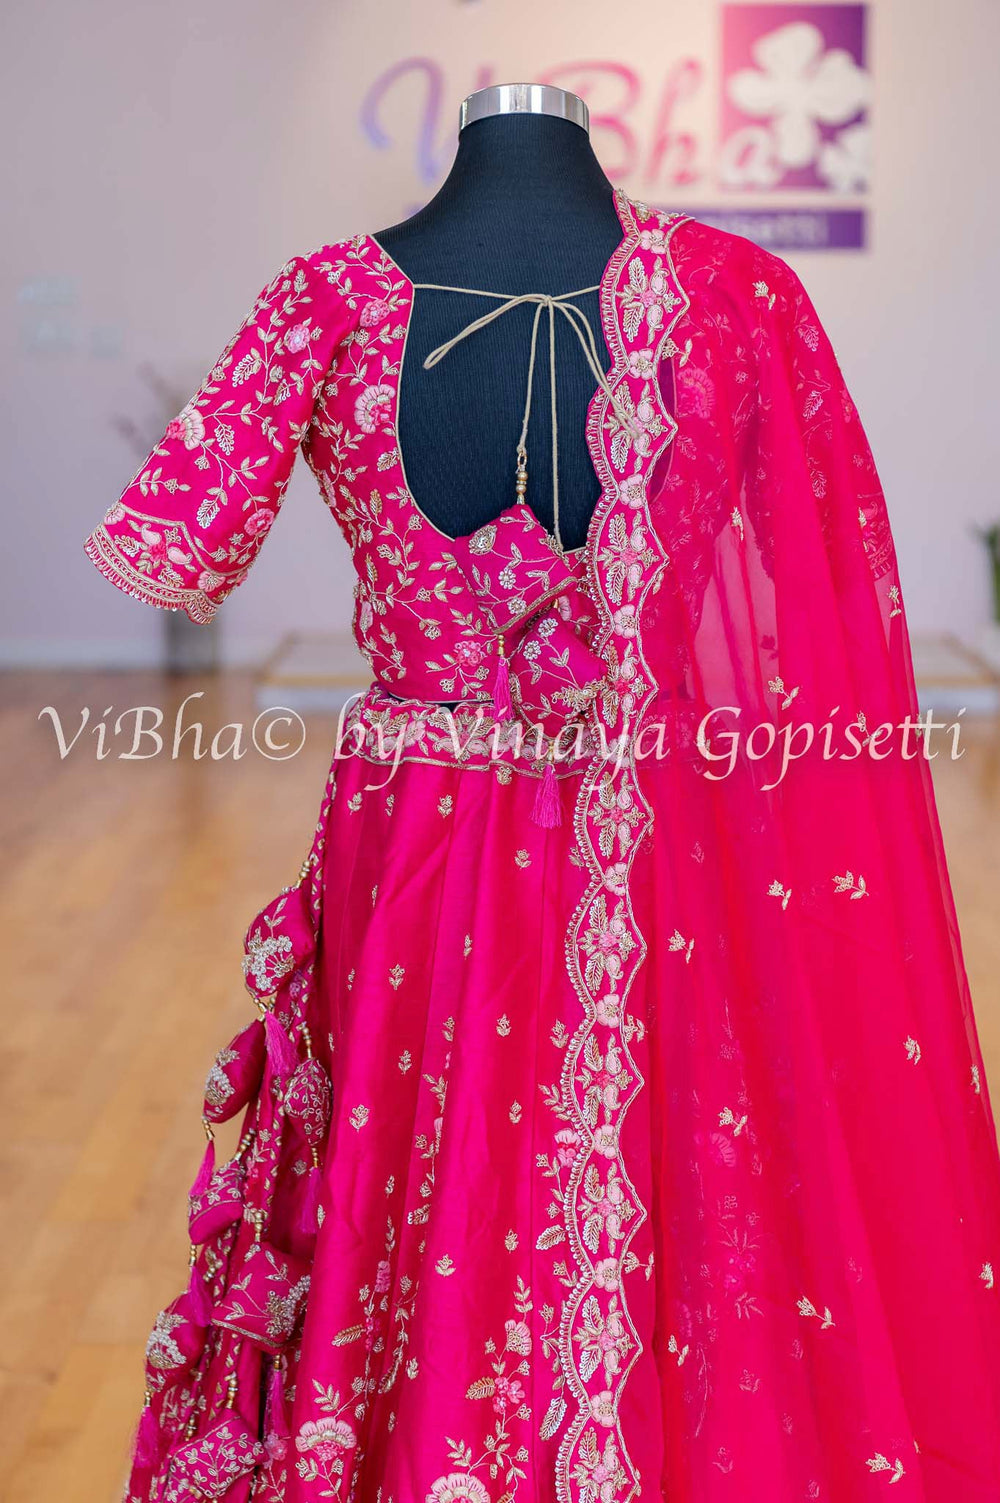 Accessories & Jewelry - Dark Pink Raw Silk Lehenga Blouse With Resham And Zardosi Embroidery With Scalloped Borders And Net Dupatta